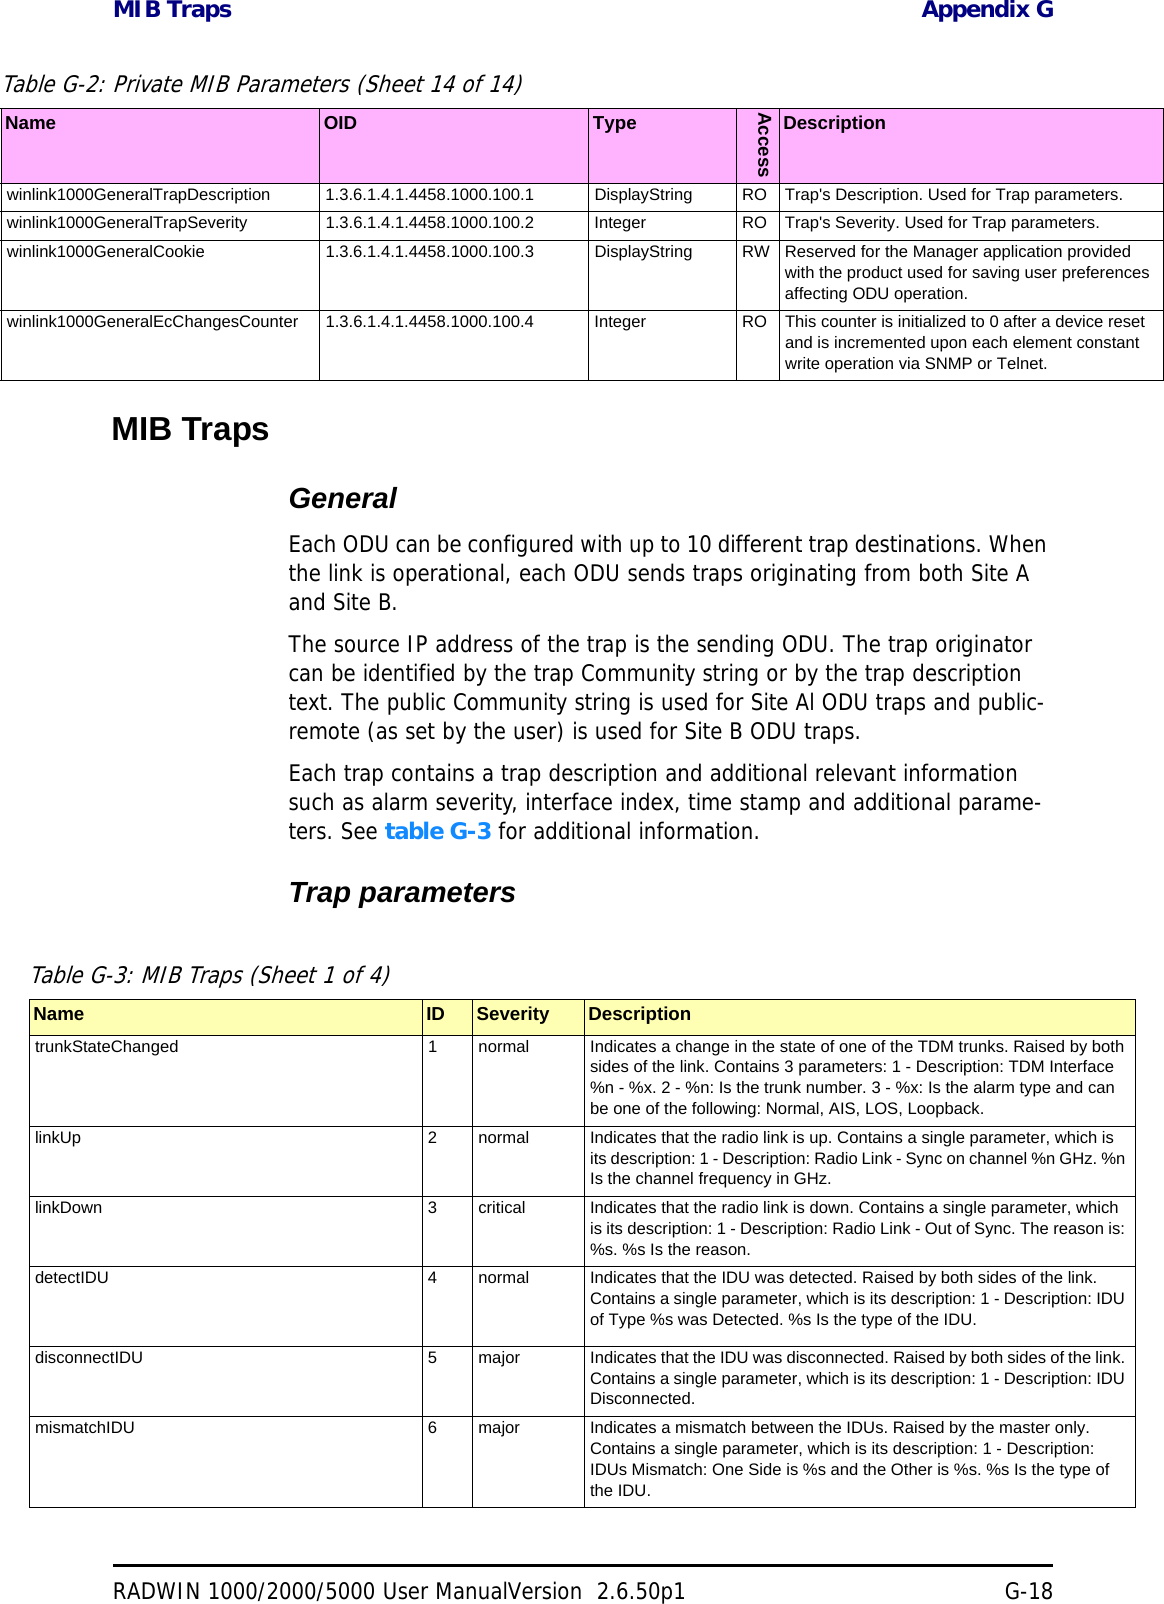 MIB Traps Appendix GRADWIN 1000/2000/5000 User ManualVersion  2.6.50p1 G-18MIB TrapsGeneralEach ODU can be configured with up to 10 different trap destinations. When the link is operational, each ODU sends traps originating from both Site A and Site B.The source IP address of the trap is the sending ODU. The trap originator can be identified by the trap Community string or by the trap description text. The public Community string is used for Site Al ODU traps and public-remote (as set by the user) is used for Site B ODU traps. Each trap contains a trap description and additional relevant information such as alarm severity, interface index, time stamp and additional parame-ters. See table G-3 for additional information. Trap parameterswinlink1000GeneralTrapDescription 1.3.6.1.4.1.4458.1000.100.1 DisplayString RO Trap&apos;s Description. Used for Trap parameters. winlink1000GeneralTrapSeverity 1.3.6.1.4.1.4458.1000.100.2 Integer RO Trap&apos;s Severity. Used for Trap parameters. winlink1000GeneralCookie 1.3.6.1.4.1.4458.1000.100.3 DisplayString RW Reserved for the Manager application provided with the product used for saving user preferences affecting ODU operation. winlink1000GeneralEcChangesCounter 1.3.6.1.4.1.4458.1000.100.4 Integer RO This counter is initialized to 0 after a device reset and is incremented upon each element constant write operation via SNMP or Telnet. Table G-3: MIB Traps (Sheet 1 of 4)Name ID Severity DescriptiontrunkStateChanged 1 normal Indicates a change in the state of one of the TDM trunks. Raised by both sides of the link. Contains 3 parameters: 1 - Description: TDM Interface %n - %x. 2 - %n: Is the trunk number. 3 - %x: Is the alarm type and can be one of the following: Normal, AIS, LOS, Loopback. linkUp 2 normal Indicates that the radio link is up. Contains a single parameter, which is its description: 1 - Description: Radio Link - Sync on channel %n GHz. %n Is the channel frequency in GHz. linkDown 3 critical Indicates that the radio link is down. Contains a single parameter, which is its description: 1 - Description: Radio Link - Out of Sync. The reason is: %s. %s Is the reason. detectIDU 4 normal Indicates that the IDU was detected. Raised by both sides of the link. Contains a single parameter, which is its description: 1 - Description: IDU of Type %s was Detected. %s Is the type of the IDU. disconnectIDU 5 major Indicates that the IDU was disconnected. Raised by both sides of the link. Contains a single parameter, which is its description: 1 - Description: IDU Disconnected. mismatchIDU 6 major Indicates a mismatch between the IDUs. Raised by the master only. Contains a single parameter, which is its description: 1 - Description: IDUs Mismatch: One Side is %s and the Other is %s. %s Is the type of the IDU. Table G-2: Private MIB Parameters (Sheet 14 of 14)Name OID TypeAccessDescription